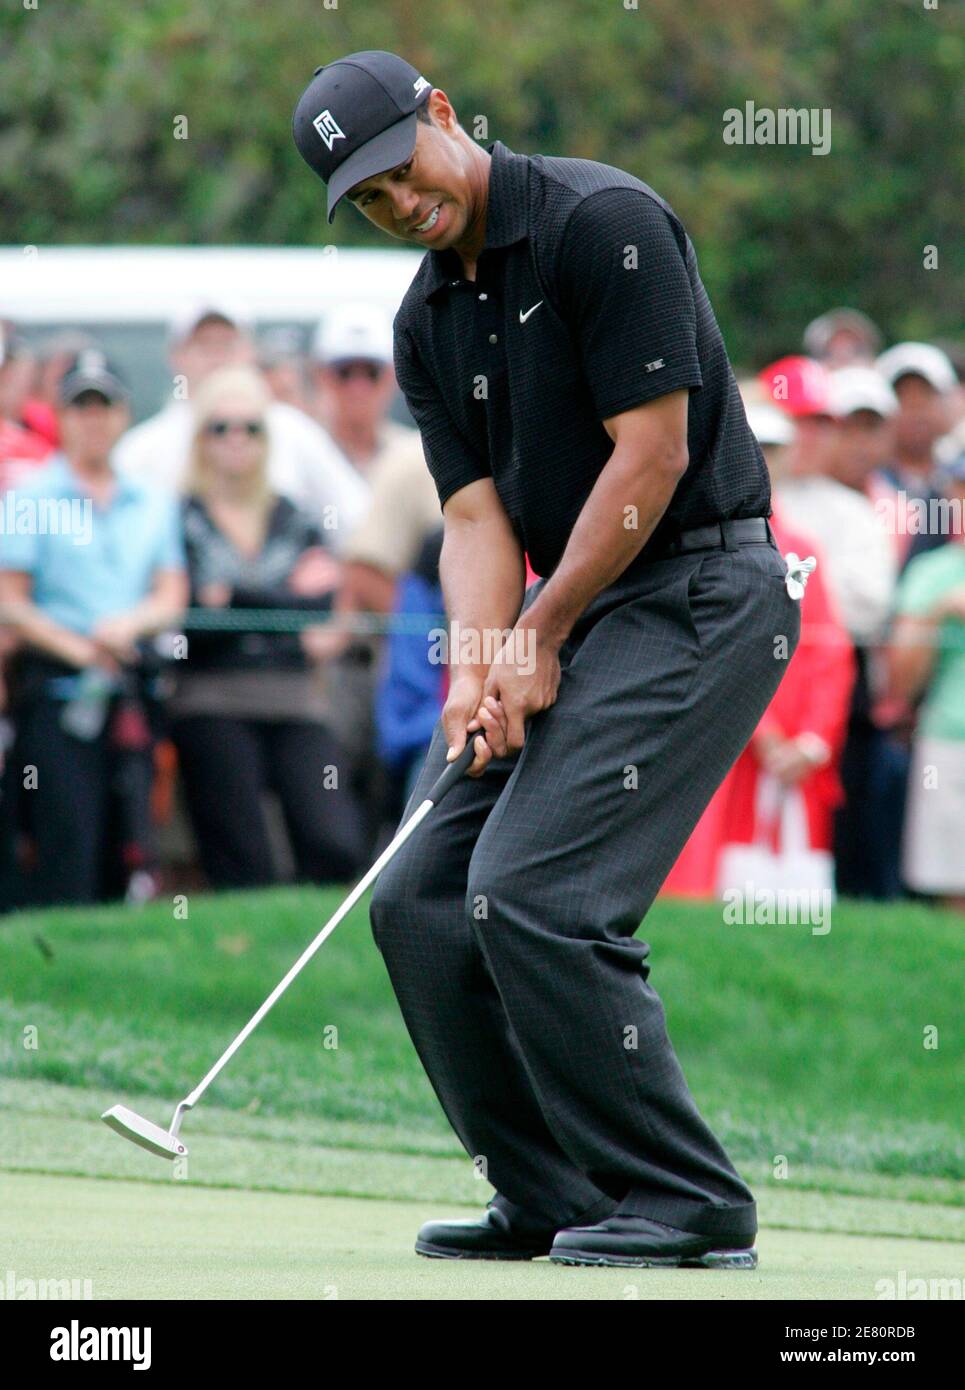 Tiger Woods reacts to a missed putt on the first hole during the second round of play at the Arnold Palmer Invitational golf tournament held at the Bay Hill Club in Orlando, Florida, March 16, 2007. REUTERS/Rick Fowler (UNITED STATES) Stock Photo